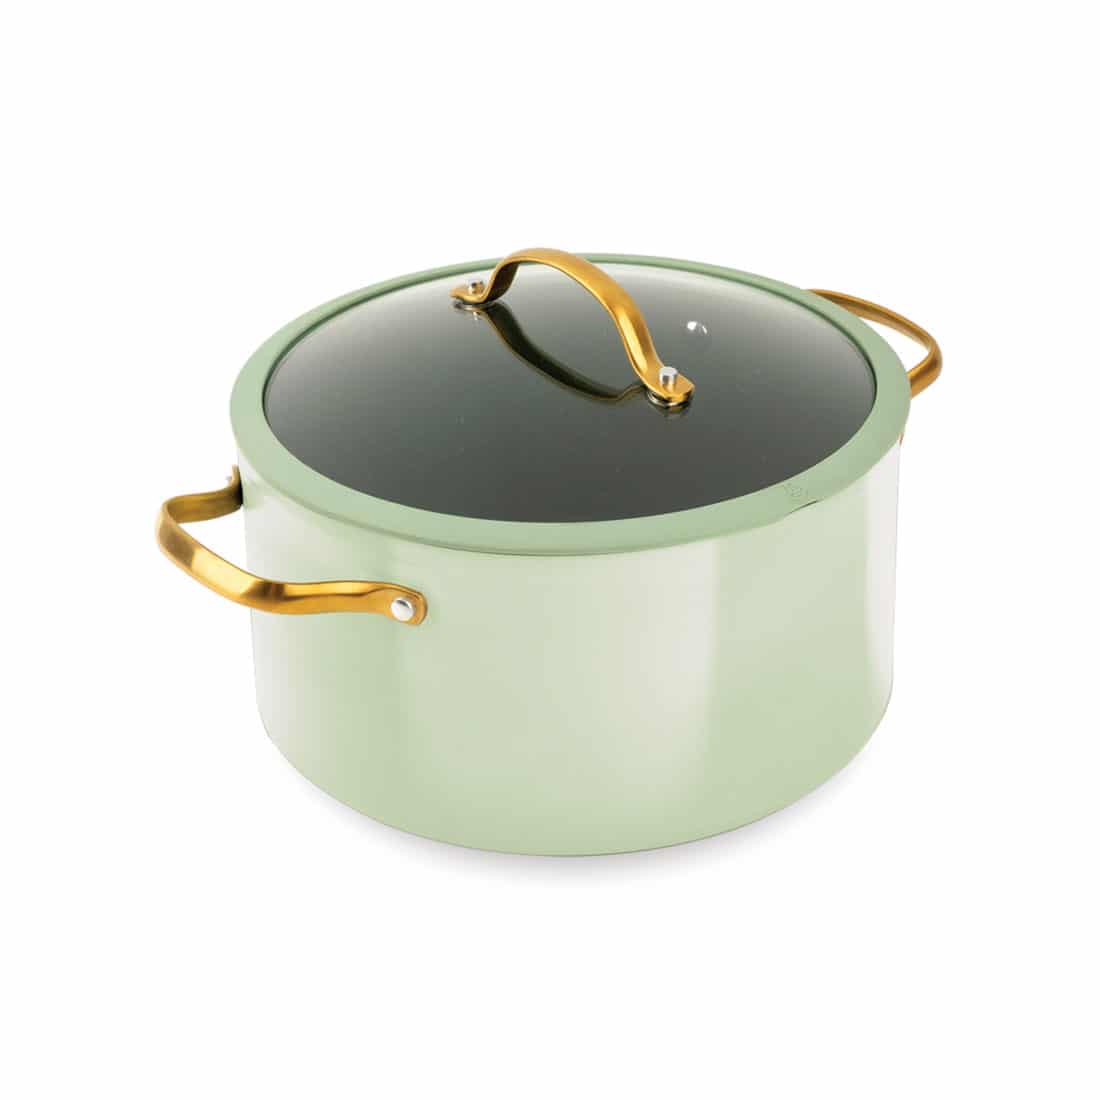 Made by Gather 19431 Beautiful 20pc Ceramic Non-Stick Cookware Set, Thyme  Green